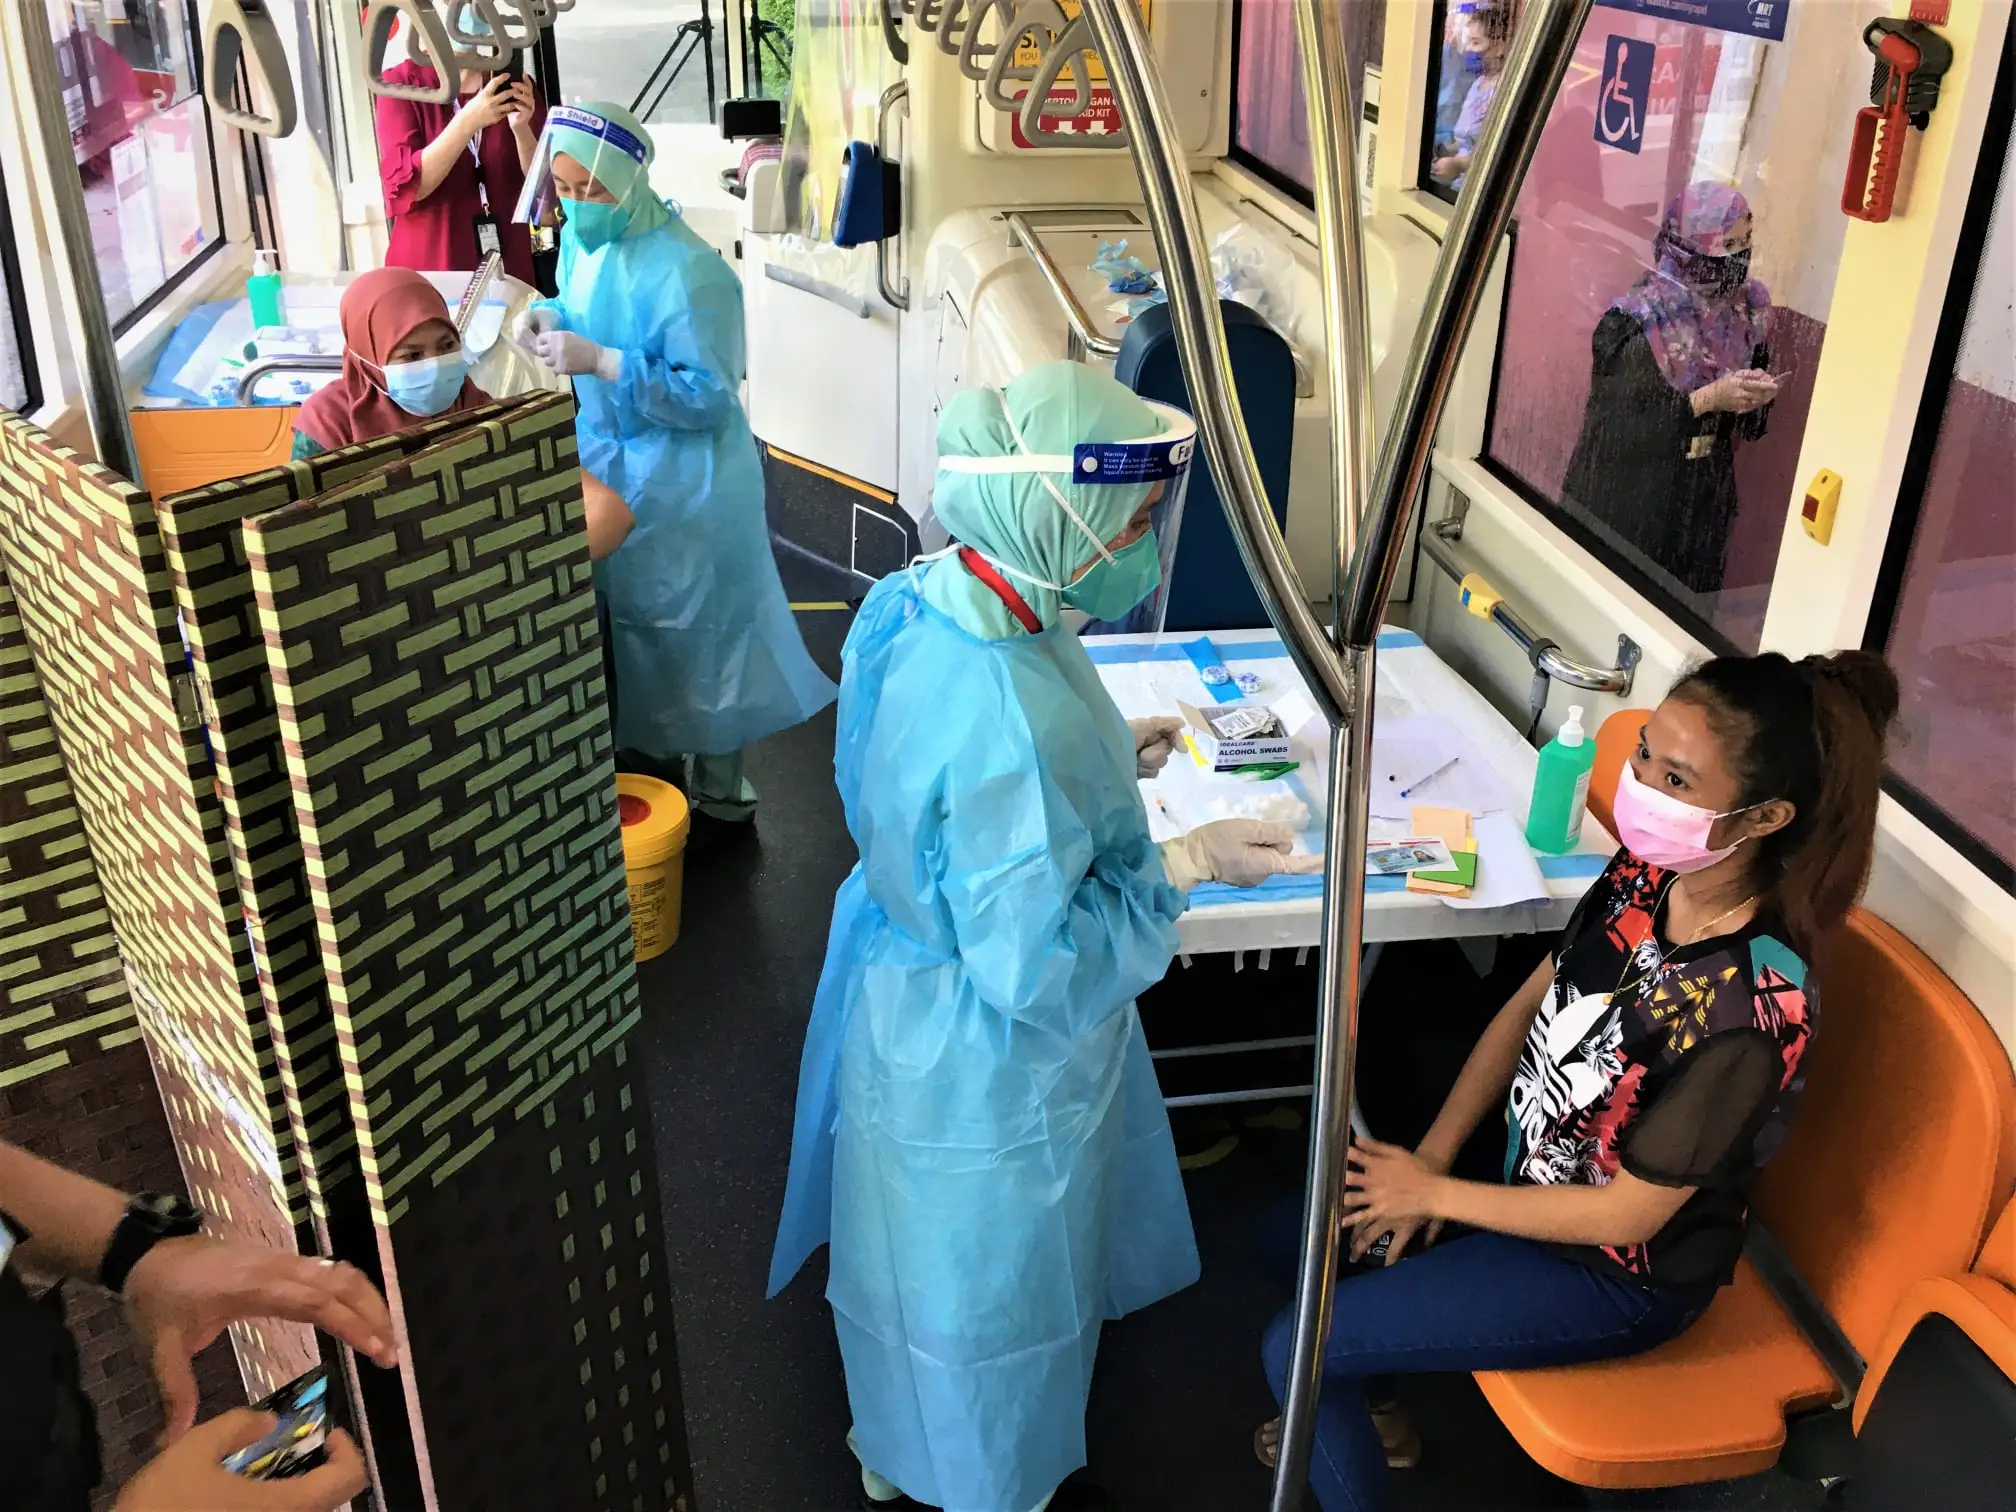 Two mrt feeder buses converted into covid-19 orang asli mobile vaccination stations | weirdkaya